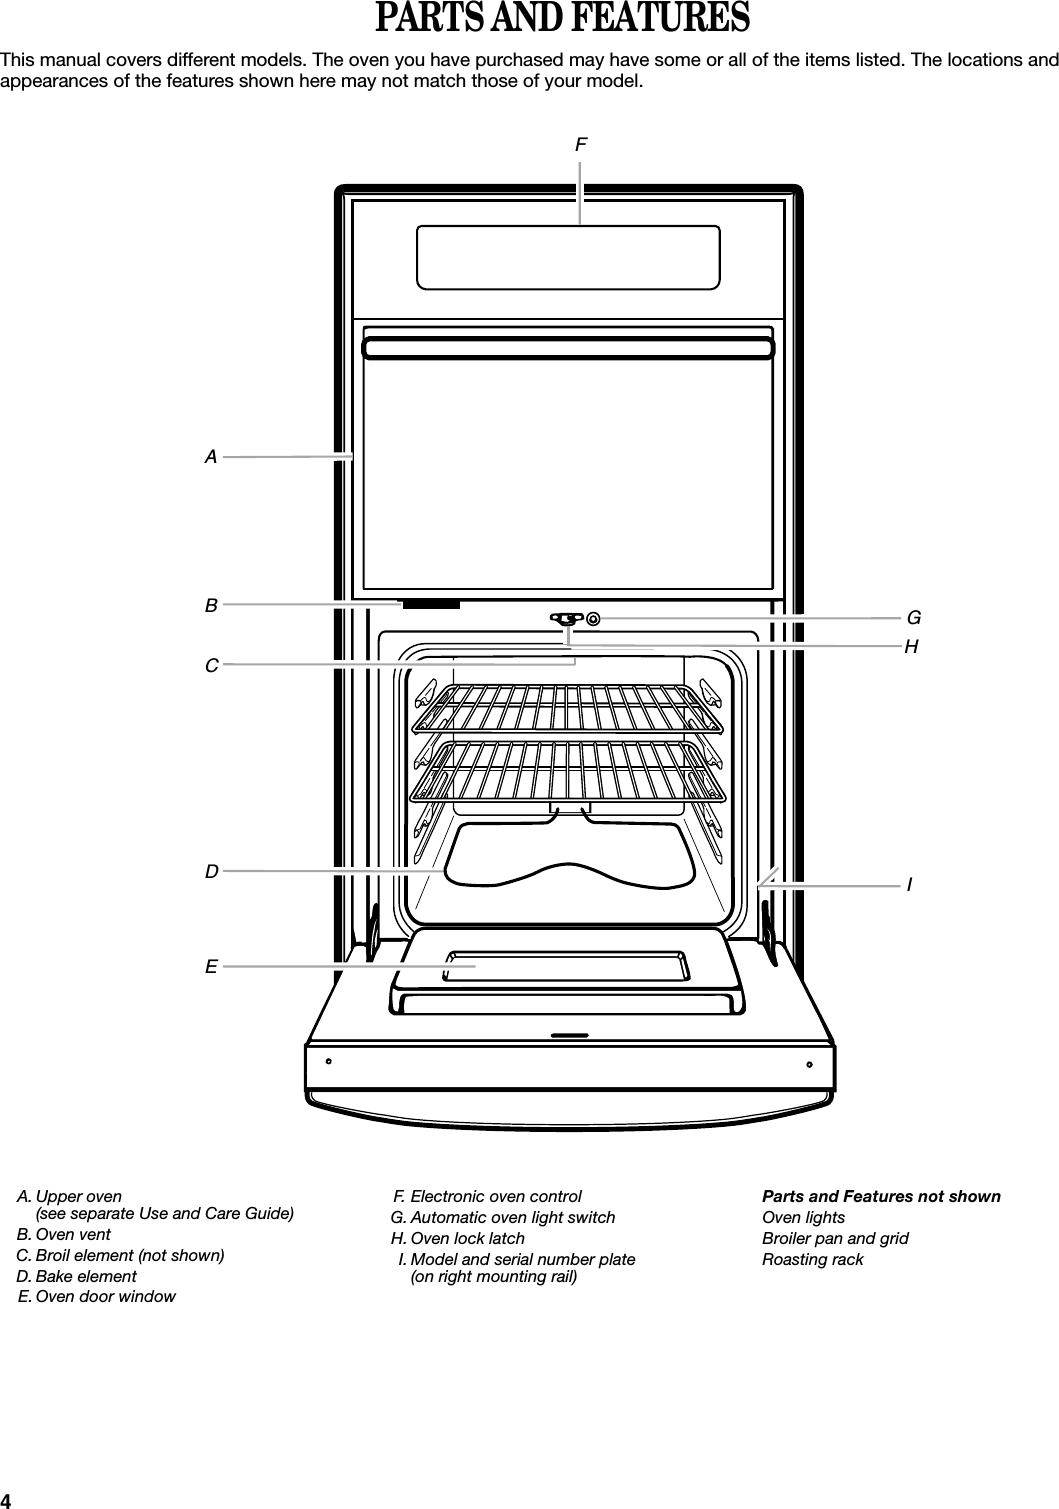 4PARTS AND FEATURESThis manual covers different models. The oven you have purchased may have some or all of the items listed. The locations and appearances of the features shown here may not match those of your model. A. Upper oven (see separate Use and Care Guide) B. Oven ventC. Broil element (not shown)D. Bake elementE. Oven door windowF. Electronic oven controlG. Automatic oven light switchH. Oven lock latchI. Model and serial number plate(on right mounting rail)Parts and Features not shownOven lightsBroiler pan and gridRoasting rackFBCDAEGHI